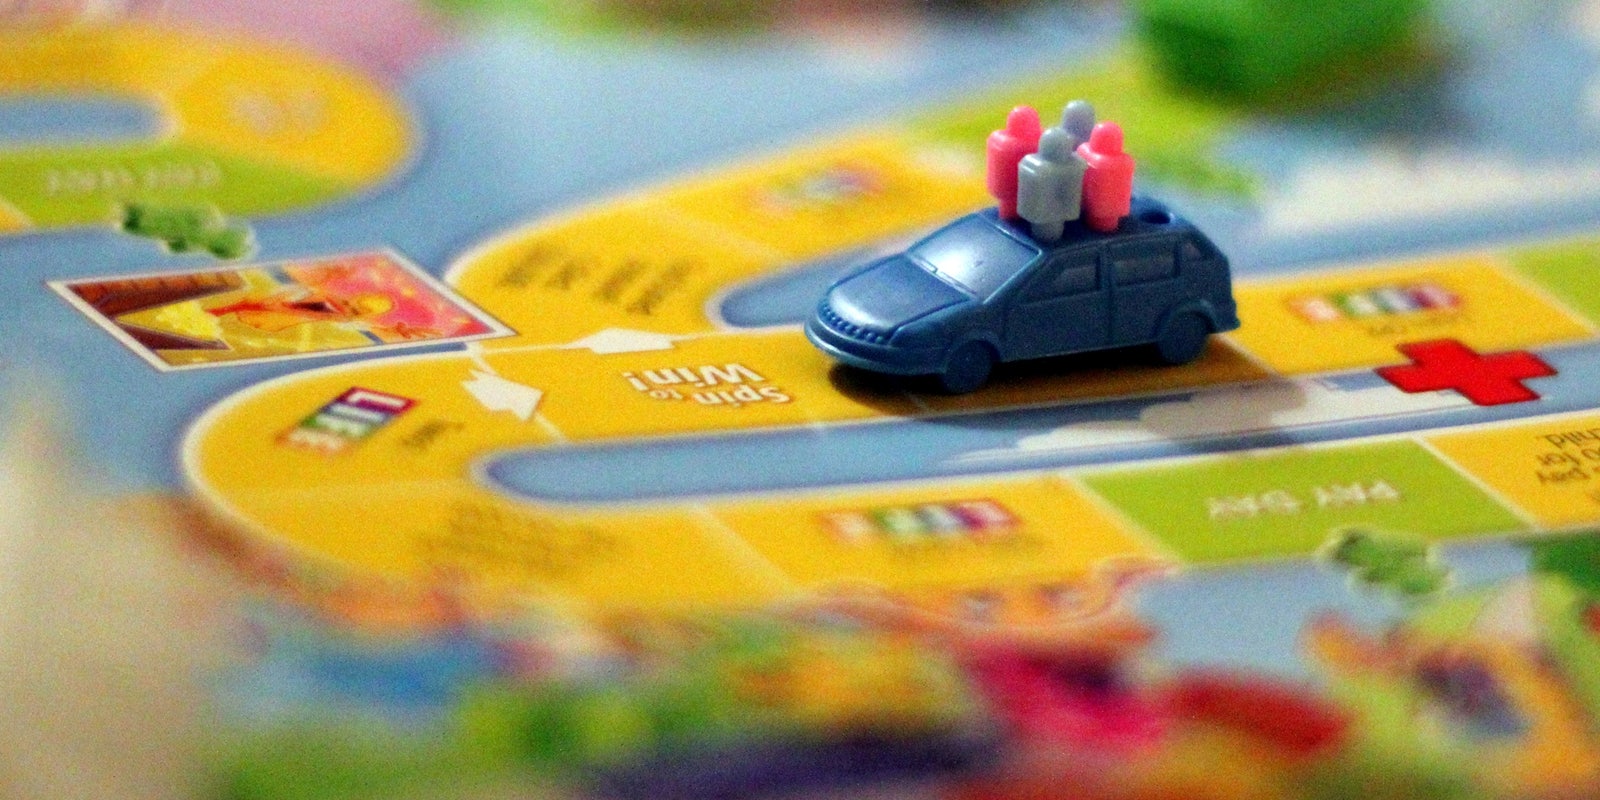 best board games for families: Life